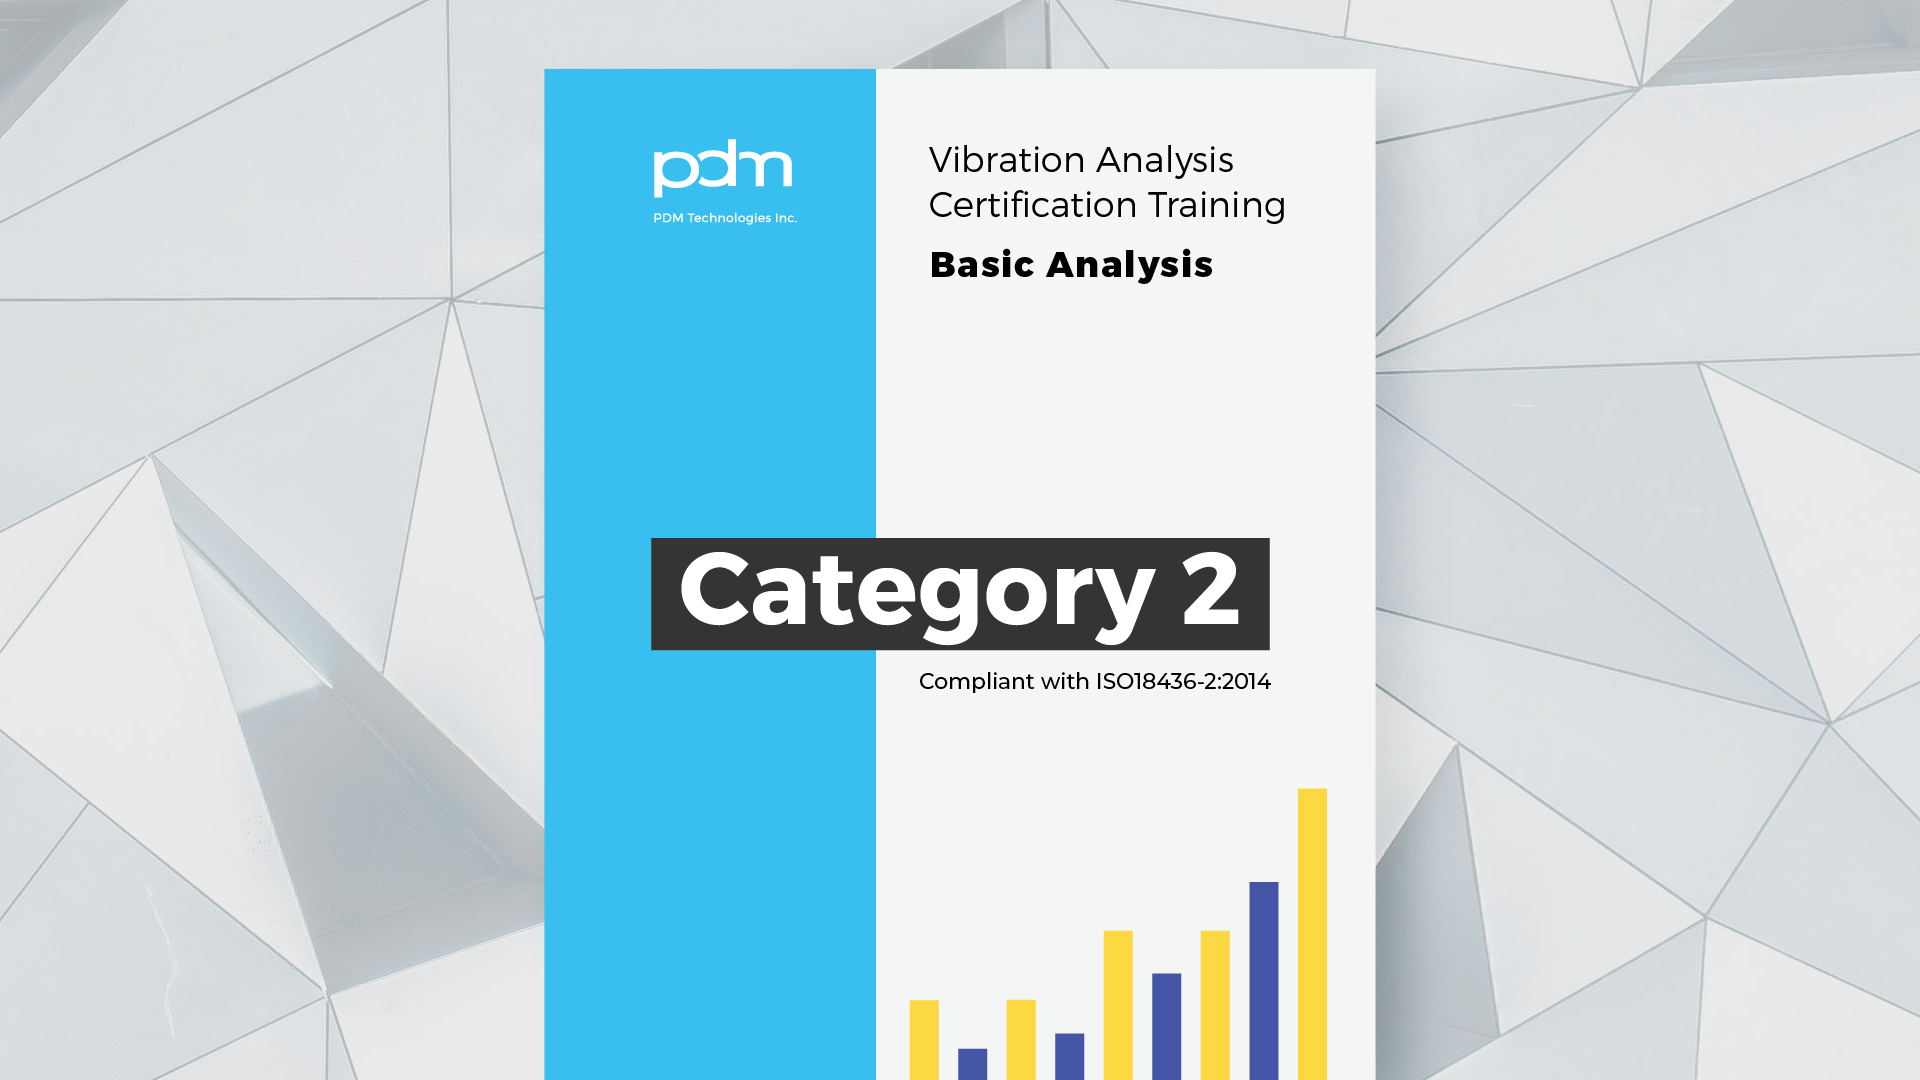 The PDM Technologies training manual for Vibration Analysis Certification, Category 2